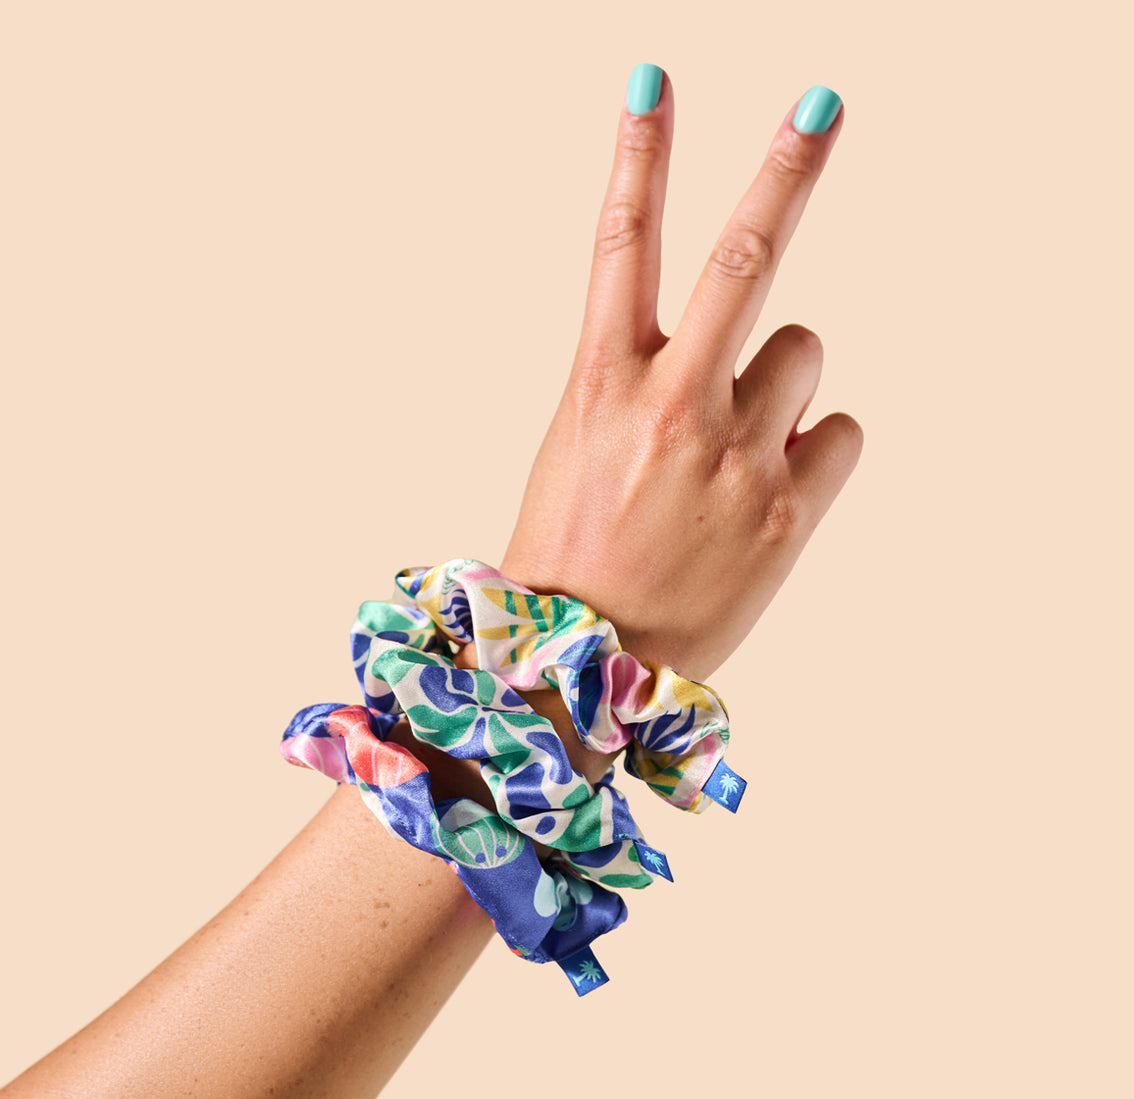 A woman's hand holding a Vita Coco Scrunchie with a peace sign on it, perfect for securing her hair in style.